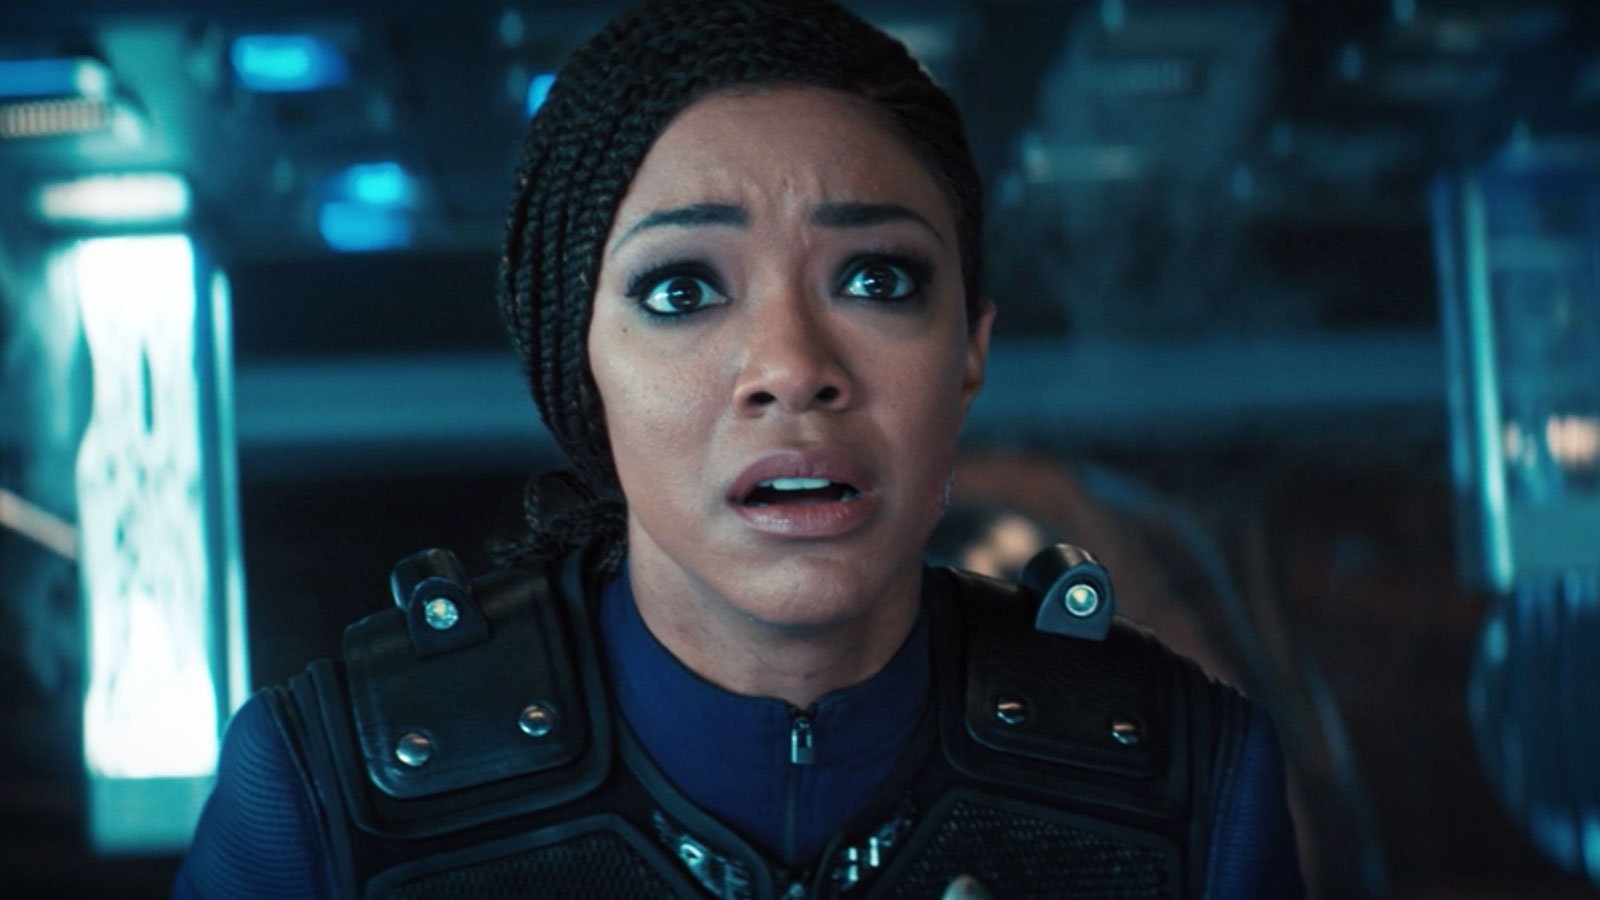 Star Trek: Discovery – Season 3, Episode 11 “Su'Kal” Review: "I Think We May Have Just Found The Source Of The Burn"